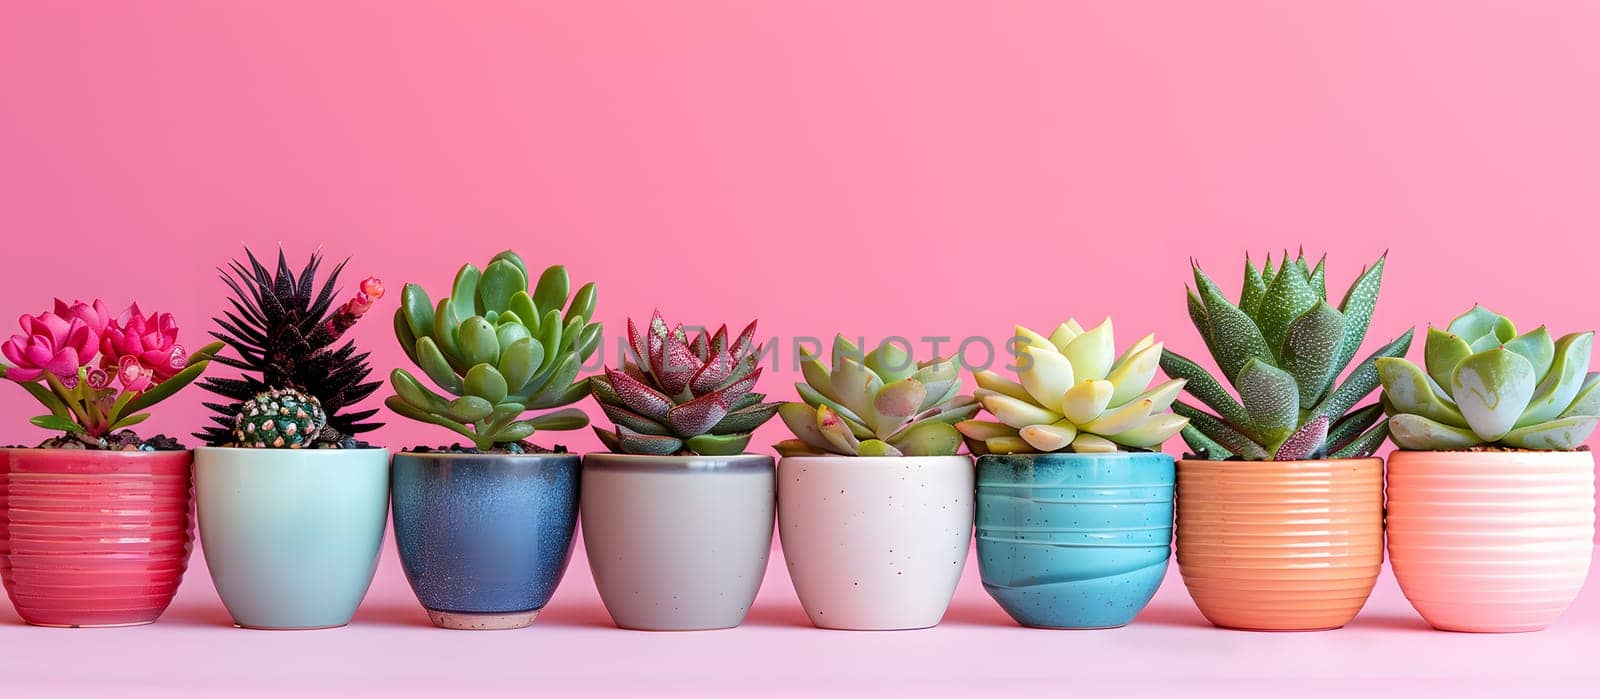 A display of vibrant houseplants in flowerpots, including purple and pink succulents, on a pink background. Adds a pop of color to any table or vase arrangement